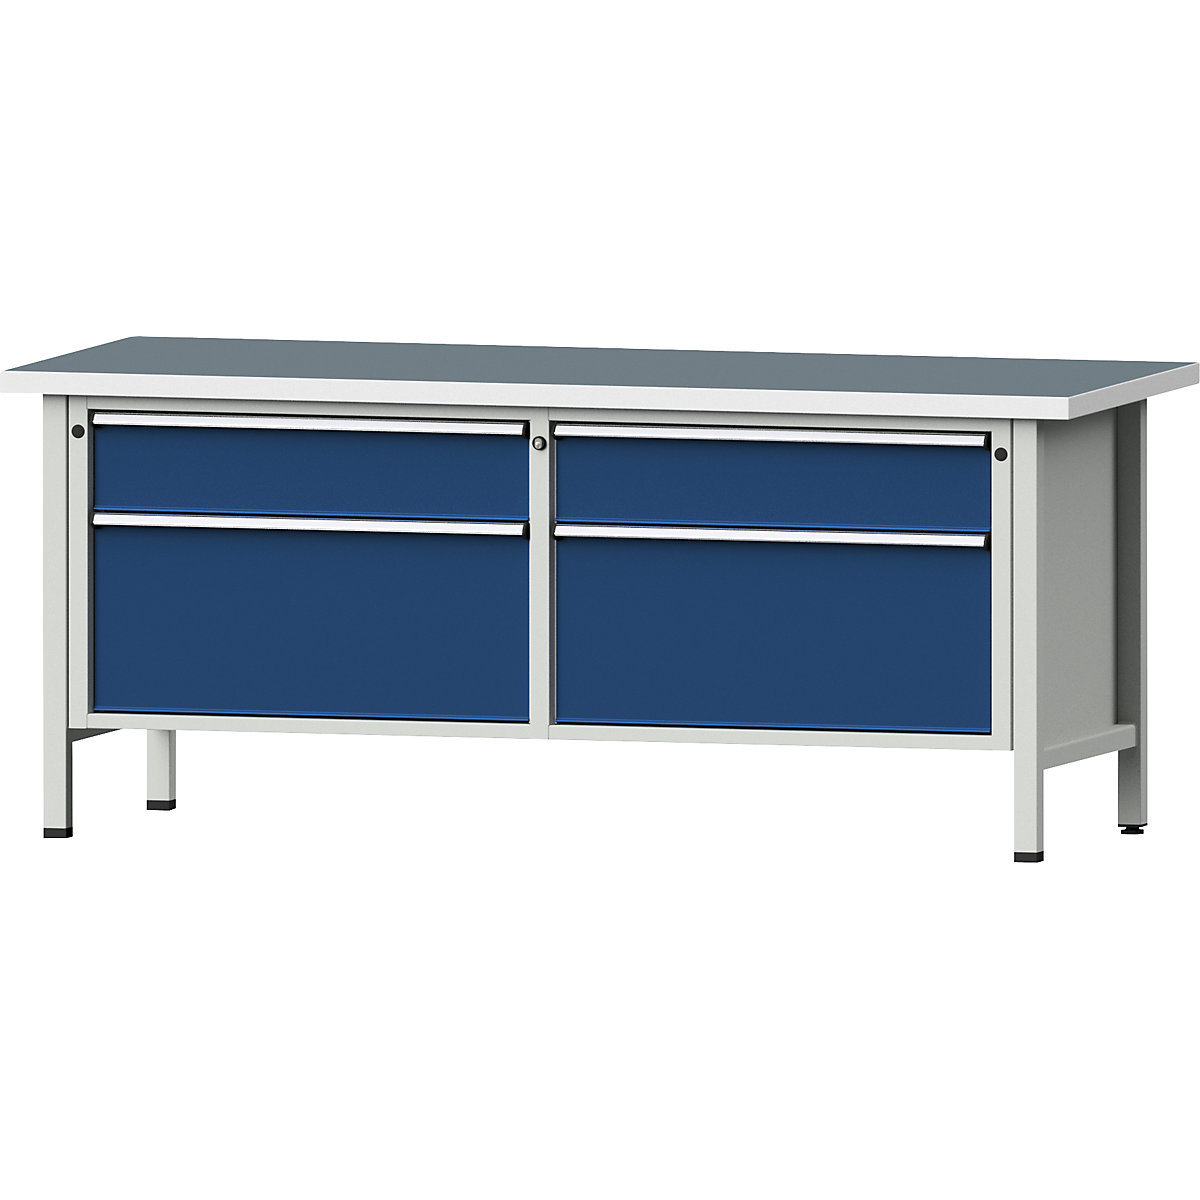 Workbench with XL/XXL drawers, frame construction – ANKE, width 2000 mm, 4 drawers, universal worktop, front in gentian blue-10